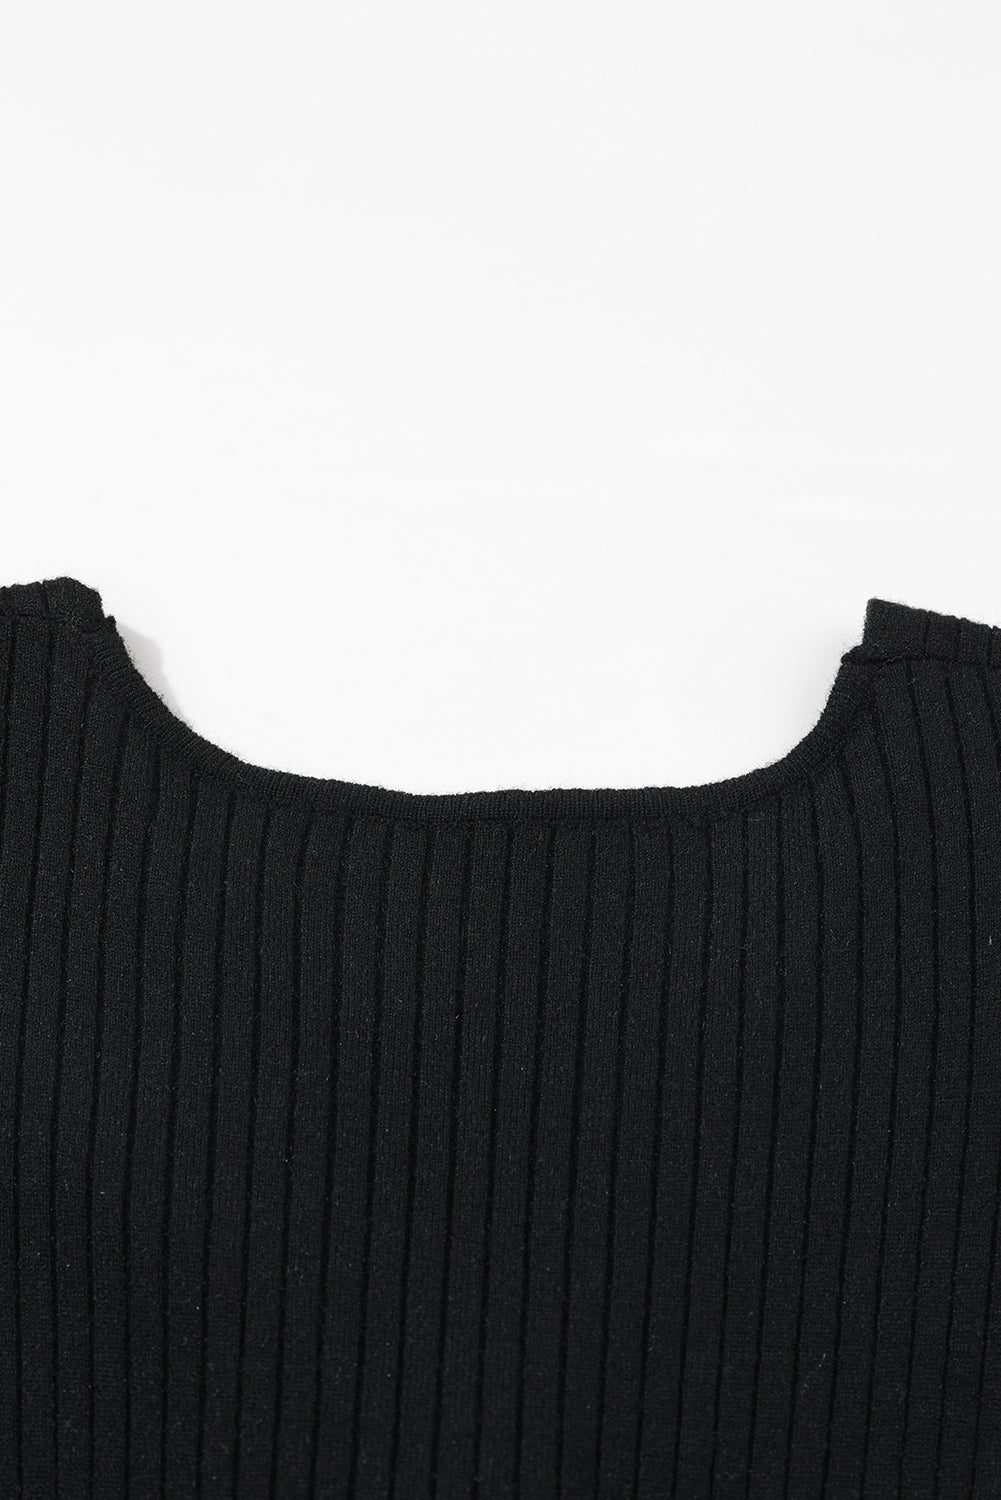 Blue Zone Planet |  Black Twisted V Neck Ribbed Knit Sweater Dress Blue Zone Planet